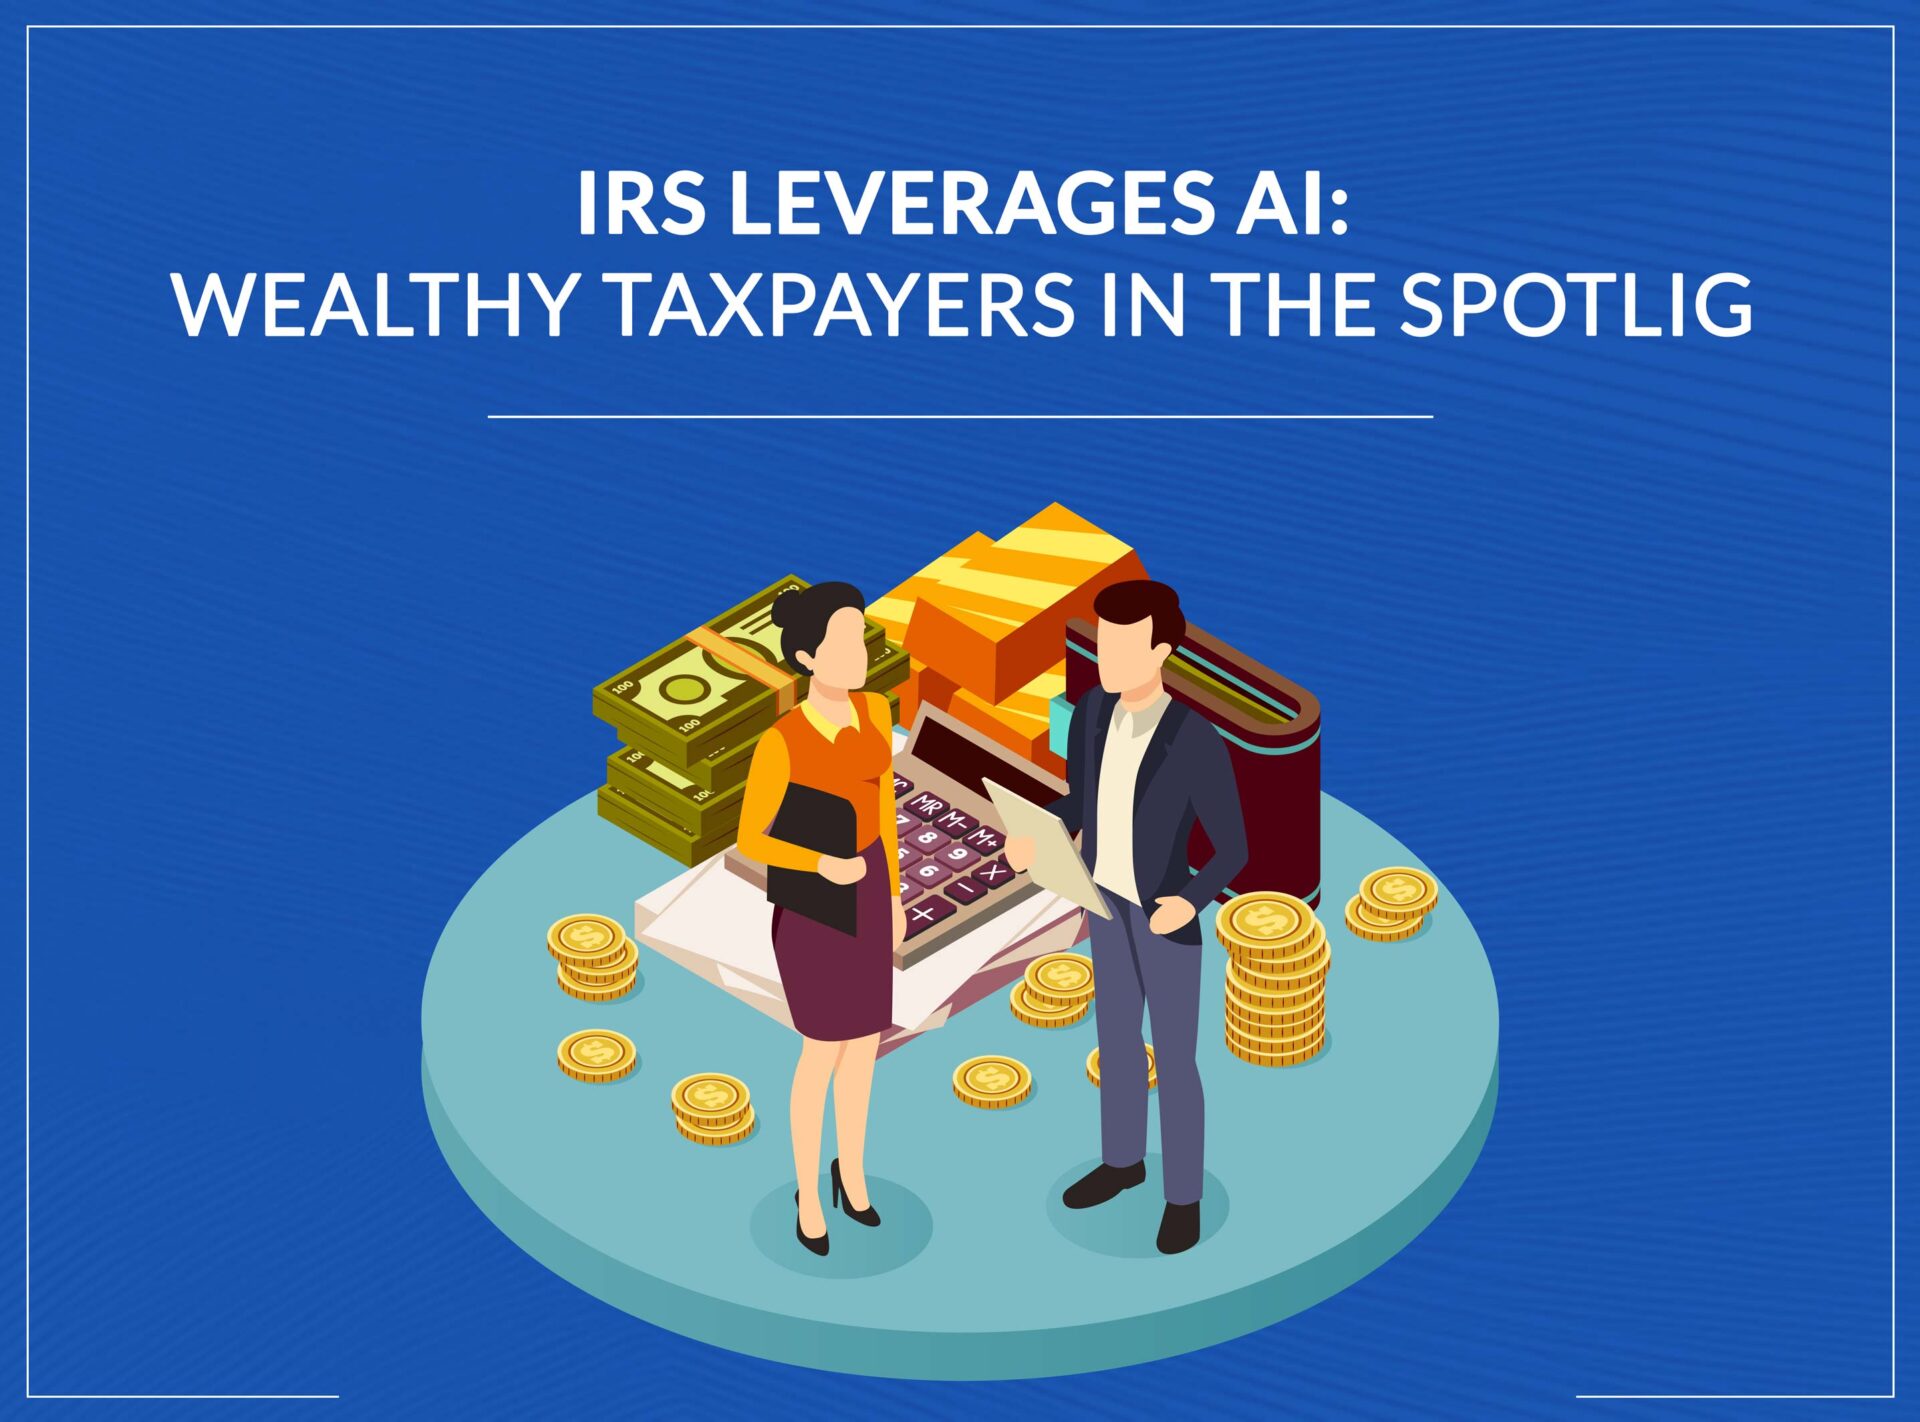 IRS plans to use AI: Wealthy Taxpayers in the Spotlight